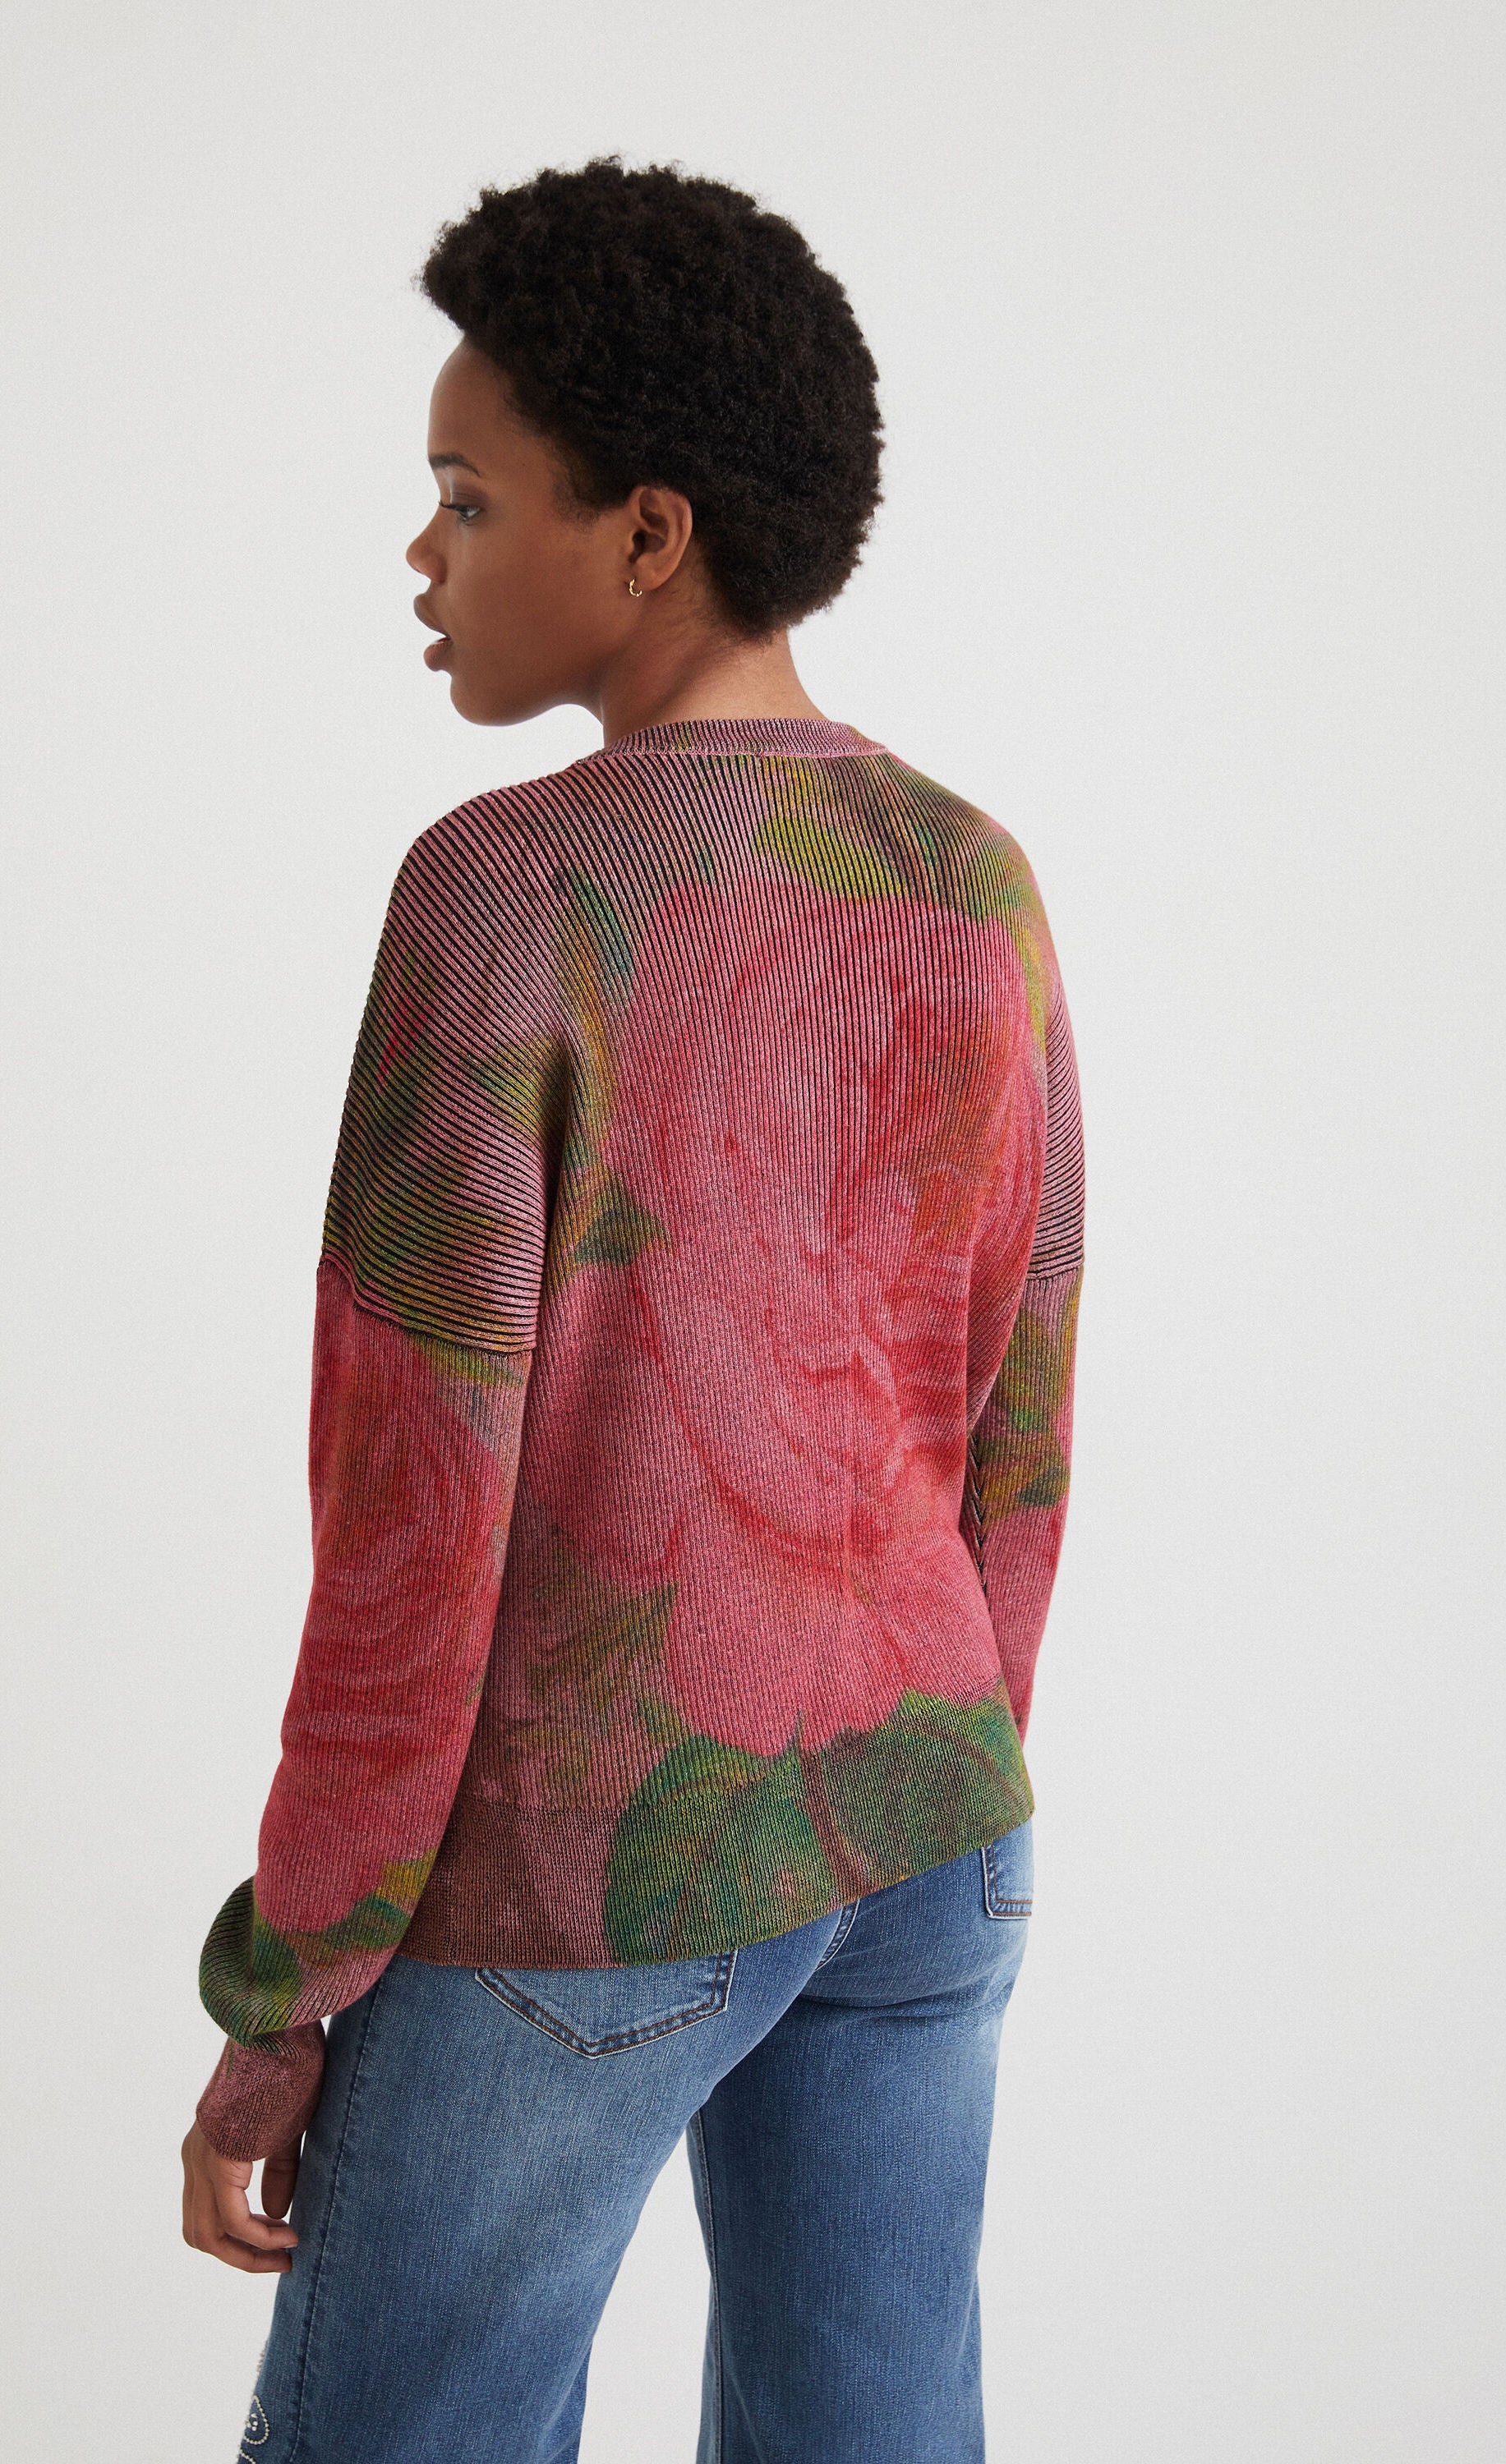 back top half view of a woman wearing the desigual knit flowers sweater. This sweater is ribbed with large pink roses printed all over it. It has long sleeves and a loose fit.